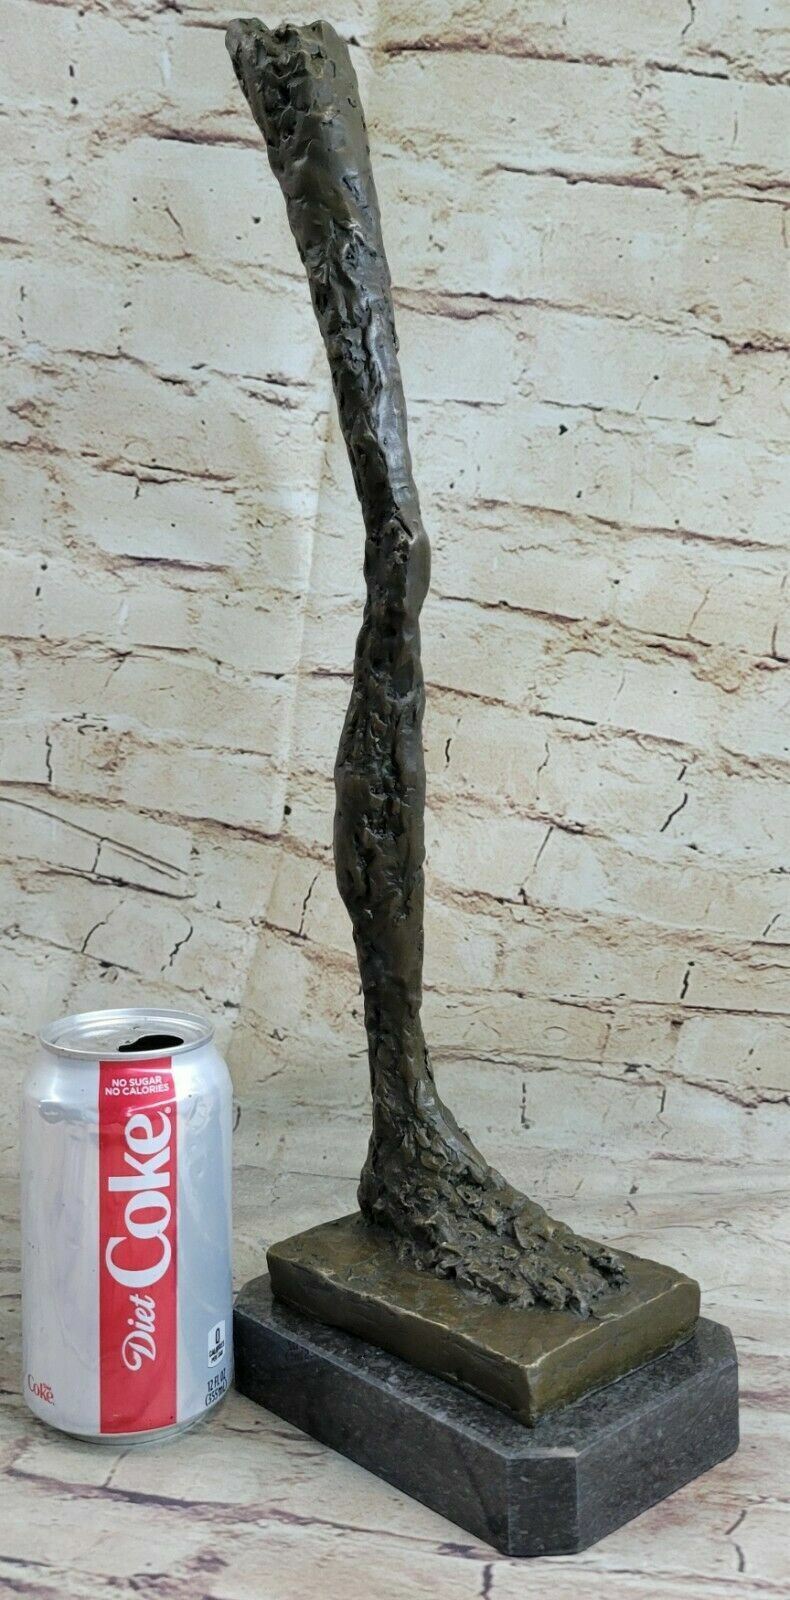 Handcrafted by Lost Wax Method Large Foot by Gia Dali Hot Cast Bronze Sculpture